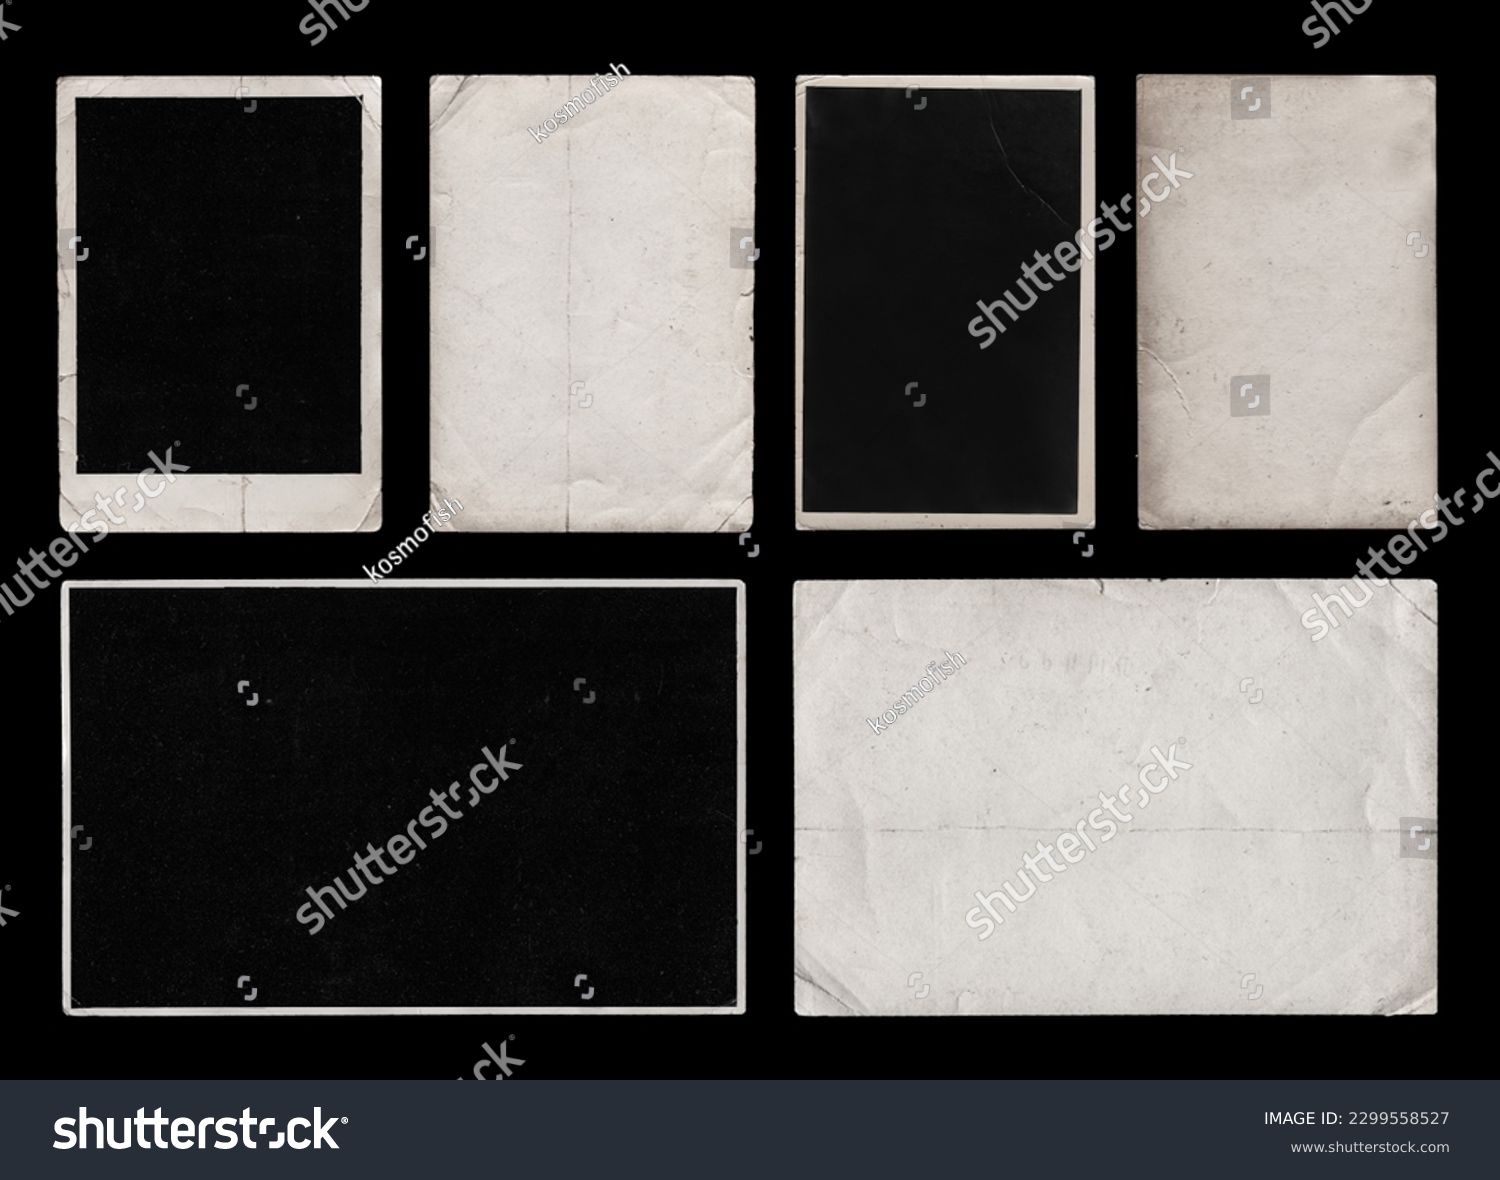 Set of Old Black Empty Aged Vintage Retro Damaged Paper Cardboard Photo Card. Blank Frame. Front and Back Side. Rough Grunge Shabby Scratched Texture. Distressed Overlay Surface for Collage #2299558527